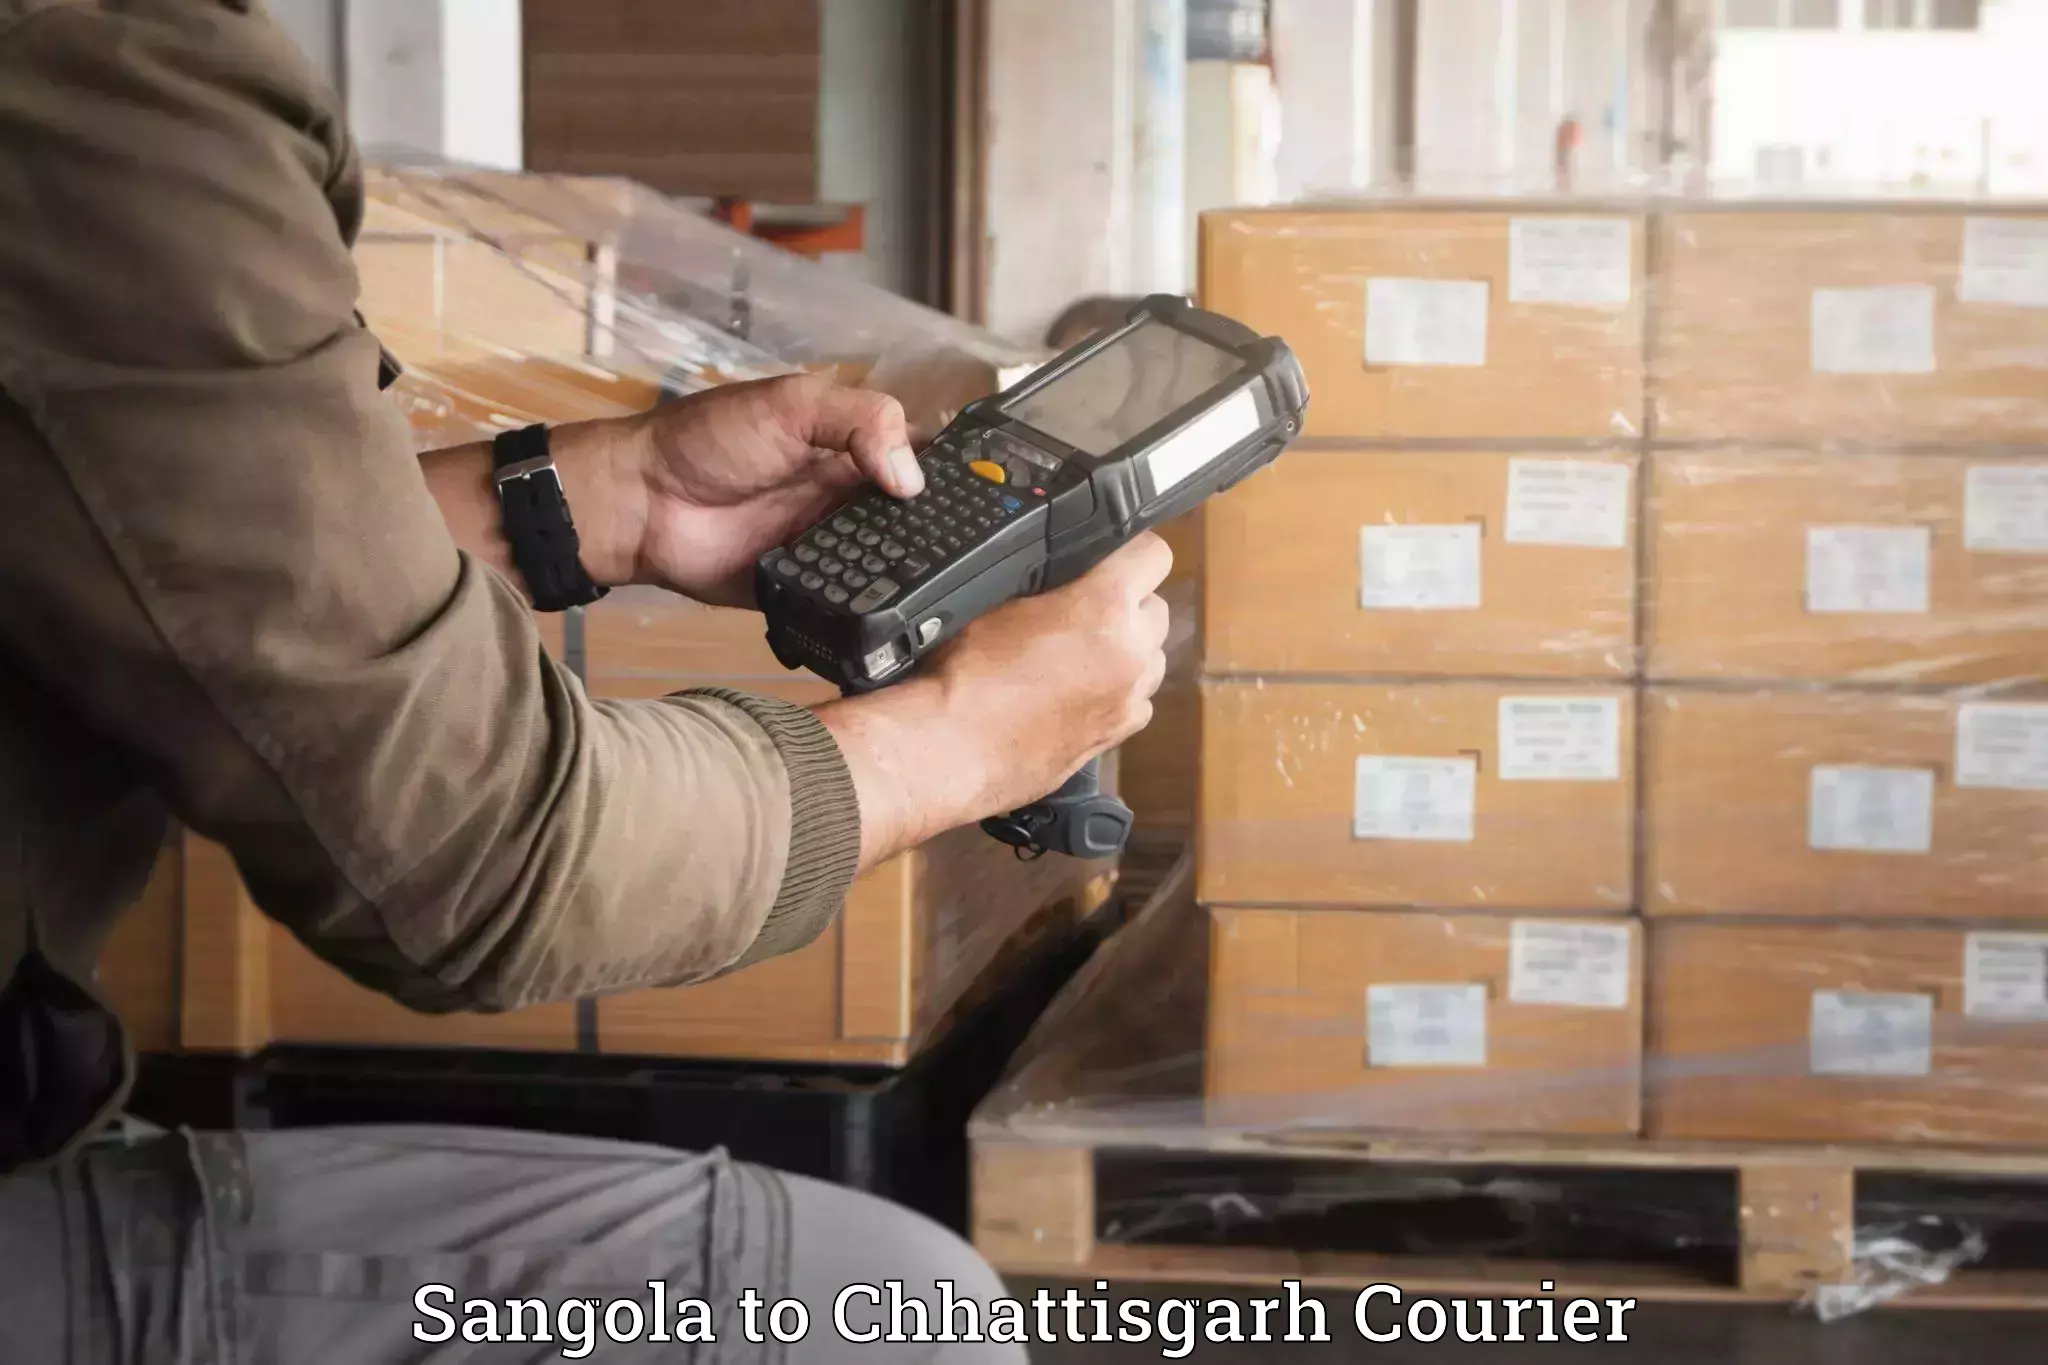 Personal effects shipping in Sangola to Chhattisgarh